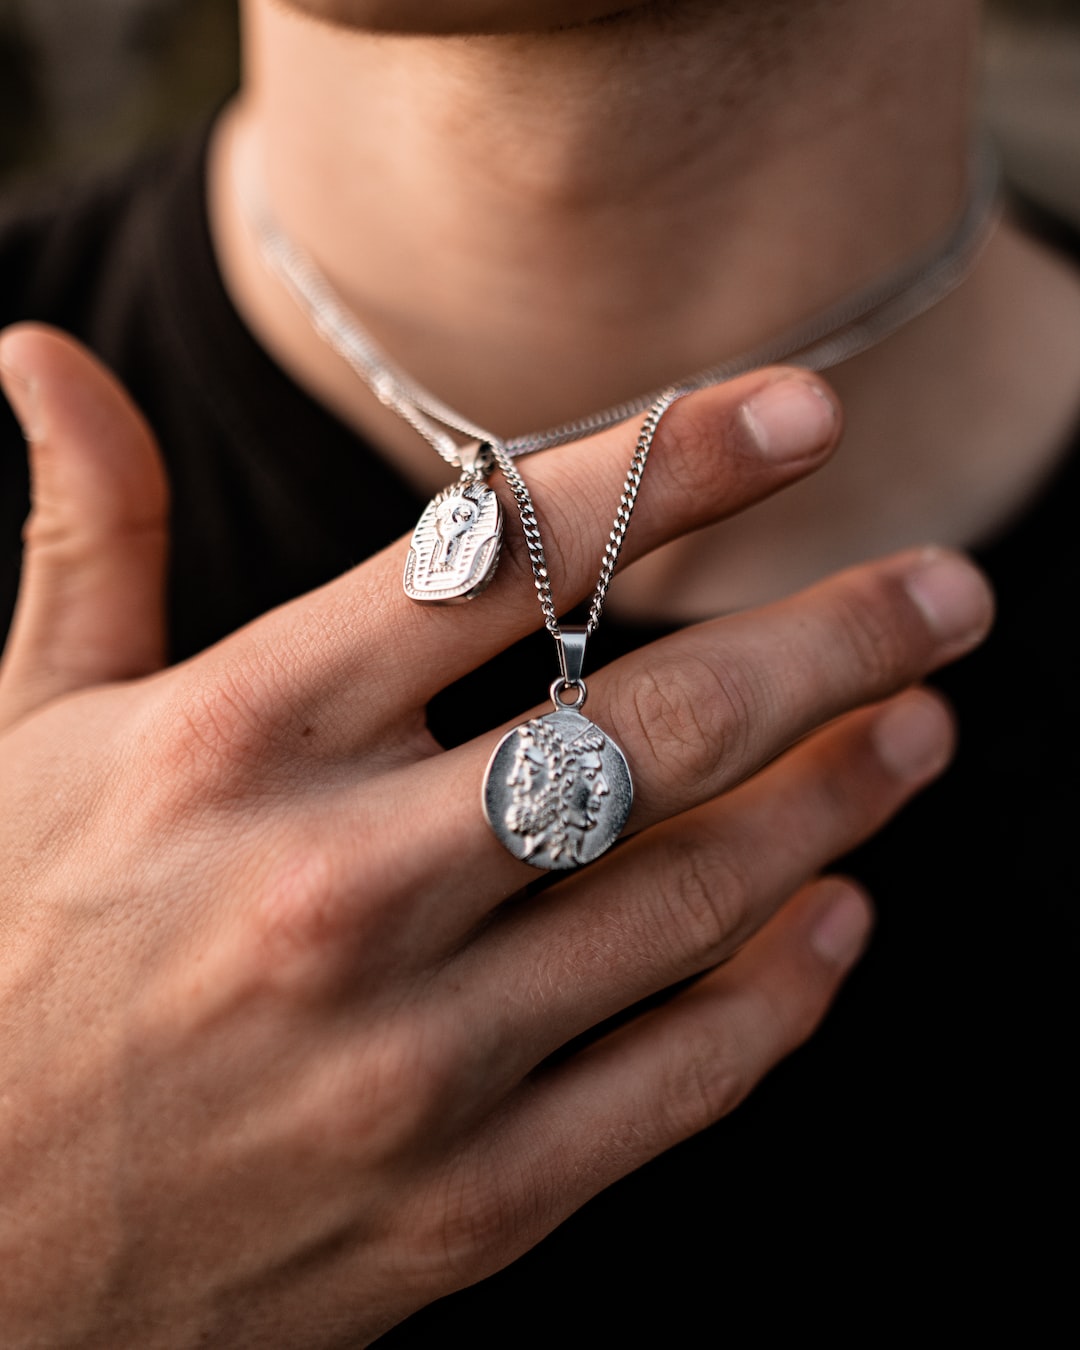 Incorporating Silver Sterling Jewelry into Your Everyday Style